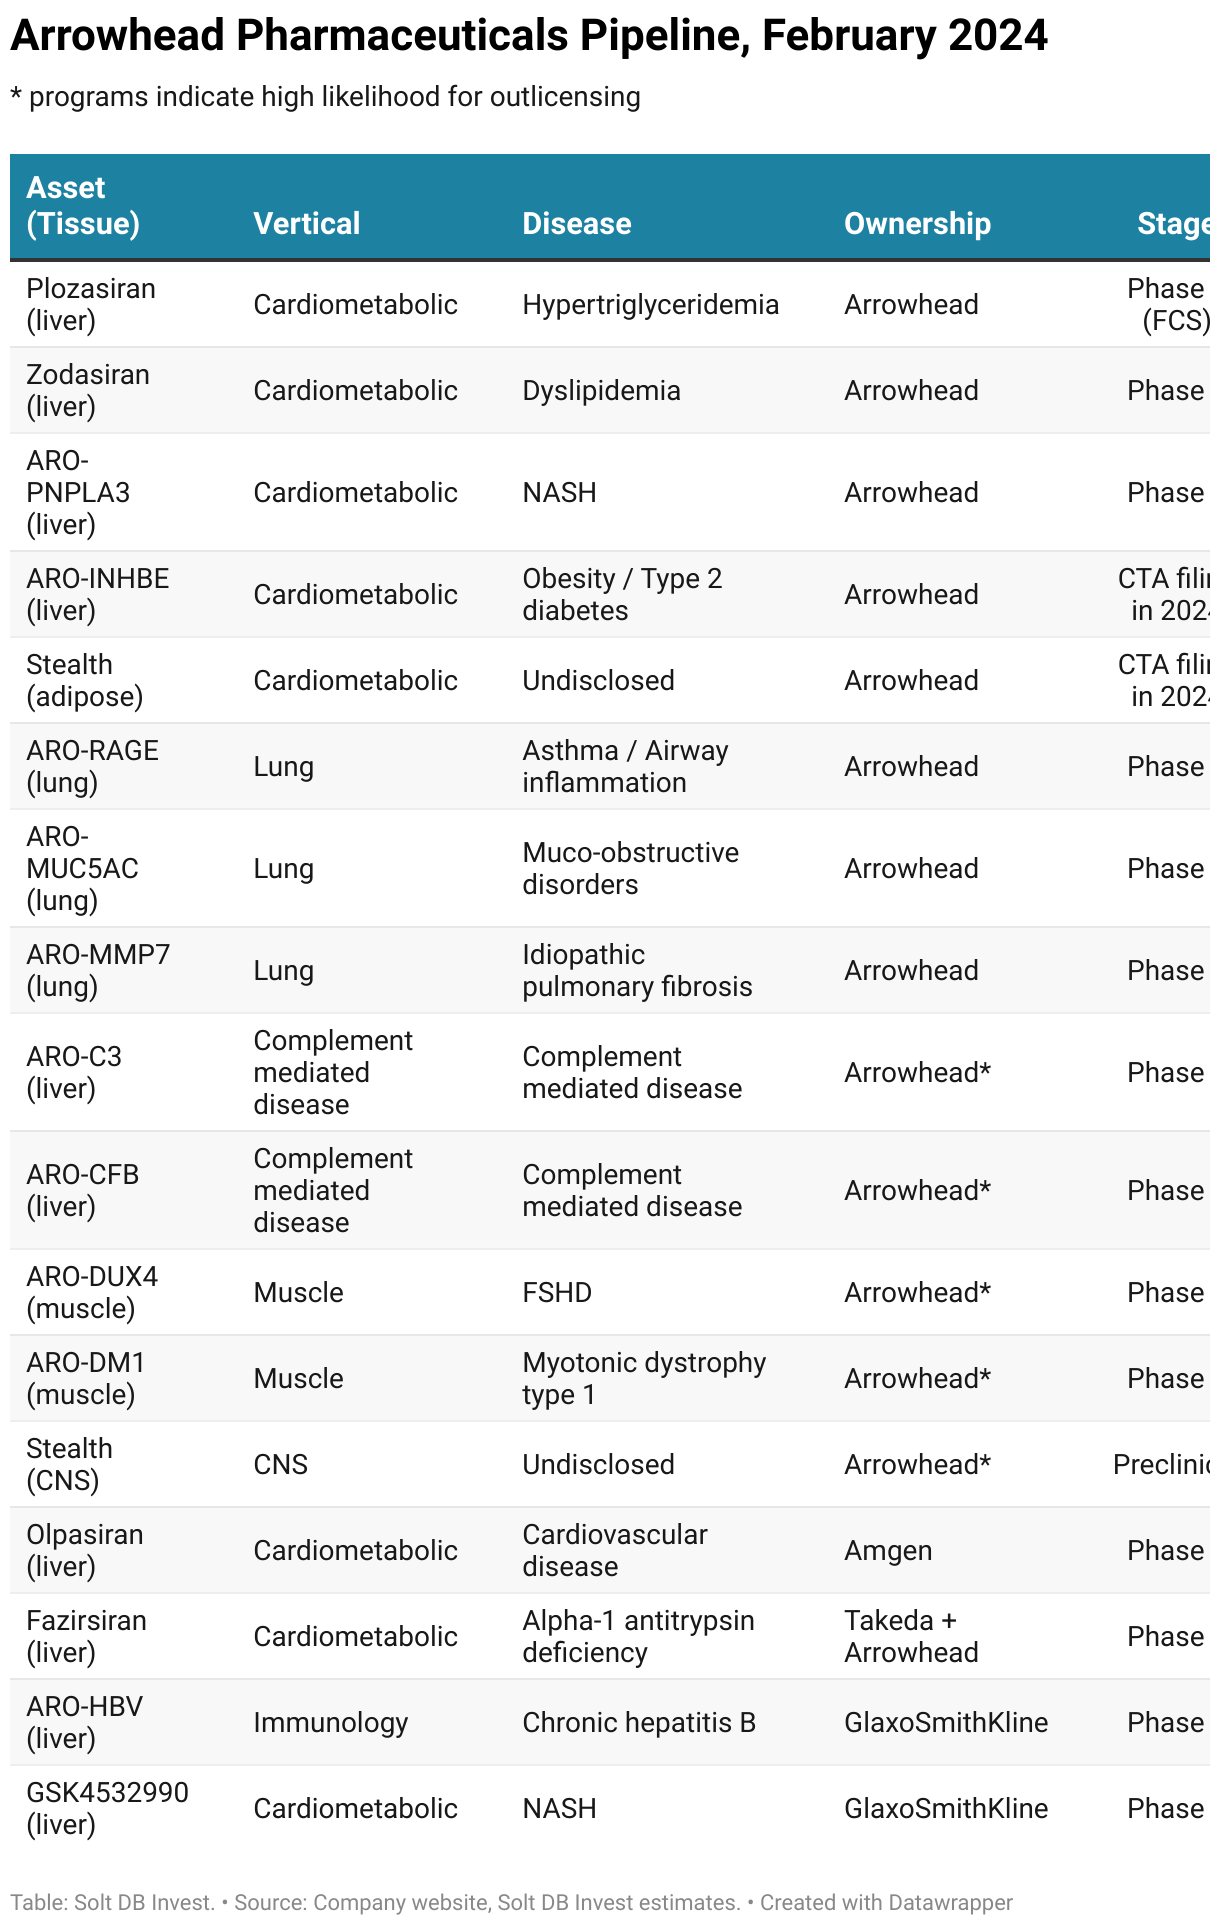 A table showing the assets in Arrowhead Pharmaceuticals' pipeline as of February 6, 2024.